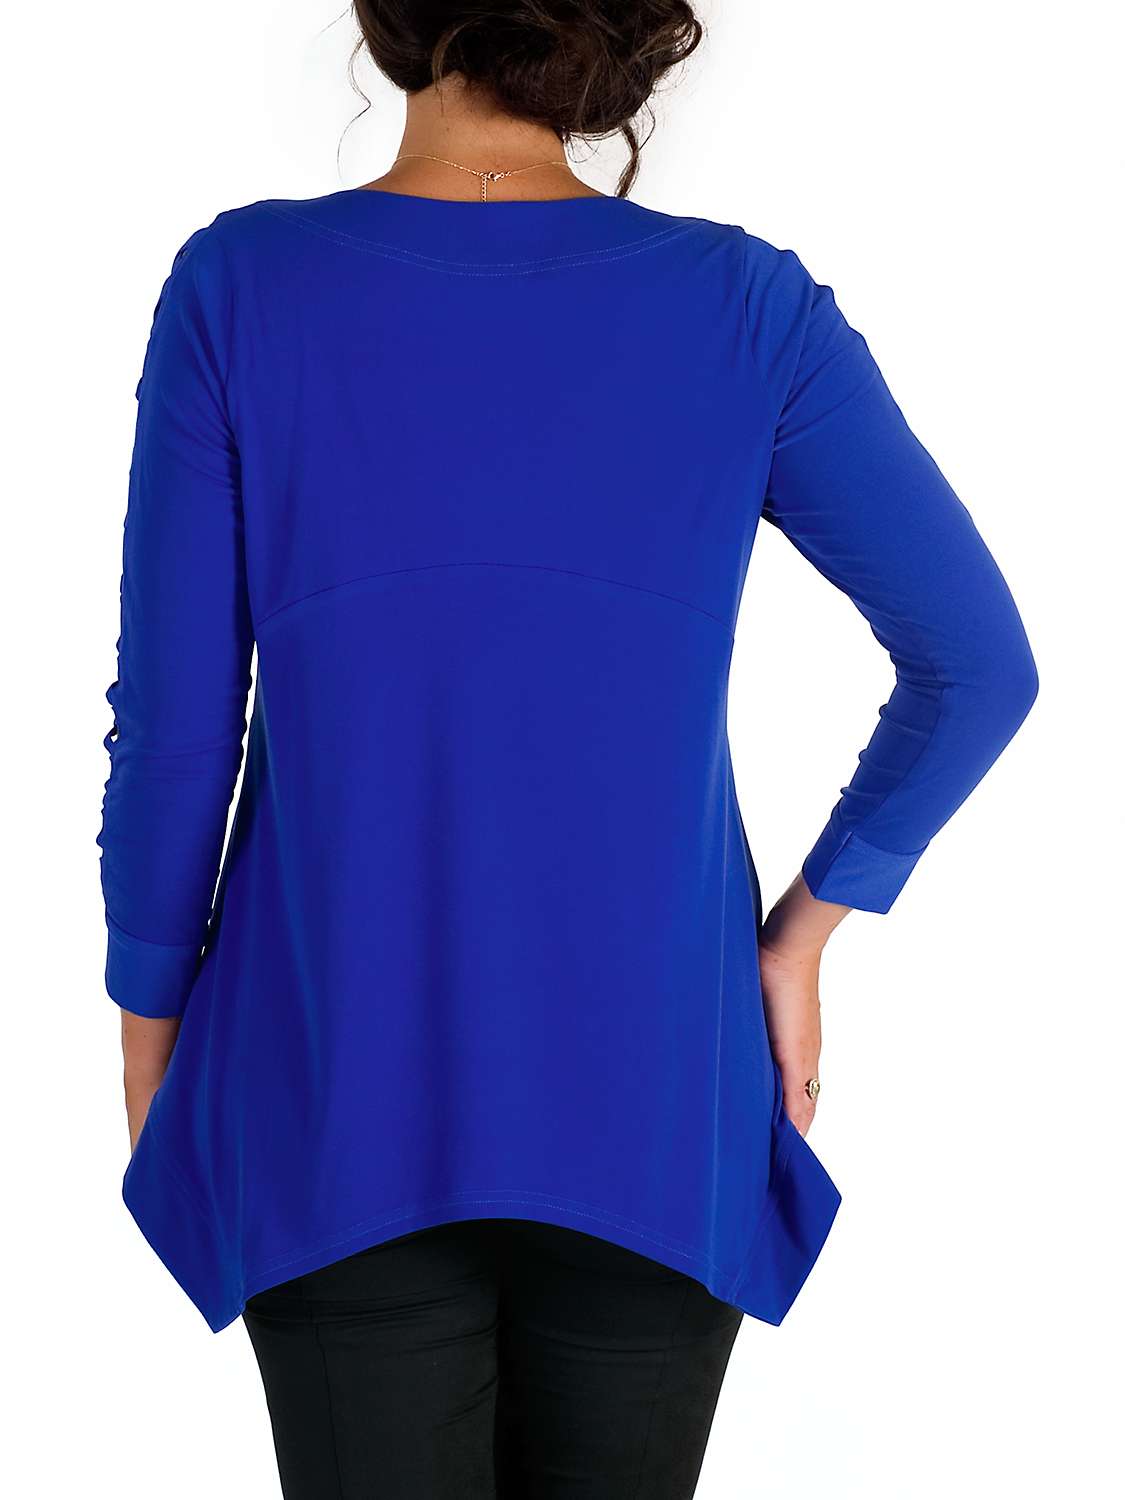 Buy Chesca Criss Cross Tunic Top Online at johnlewis.com